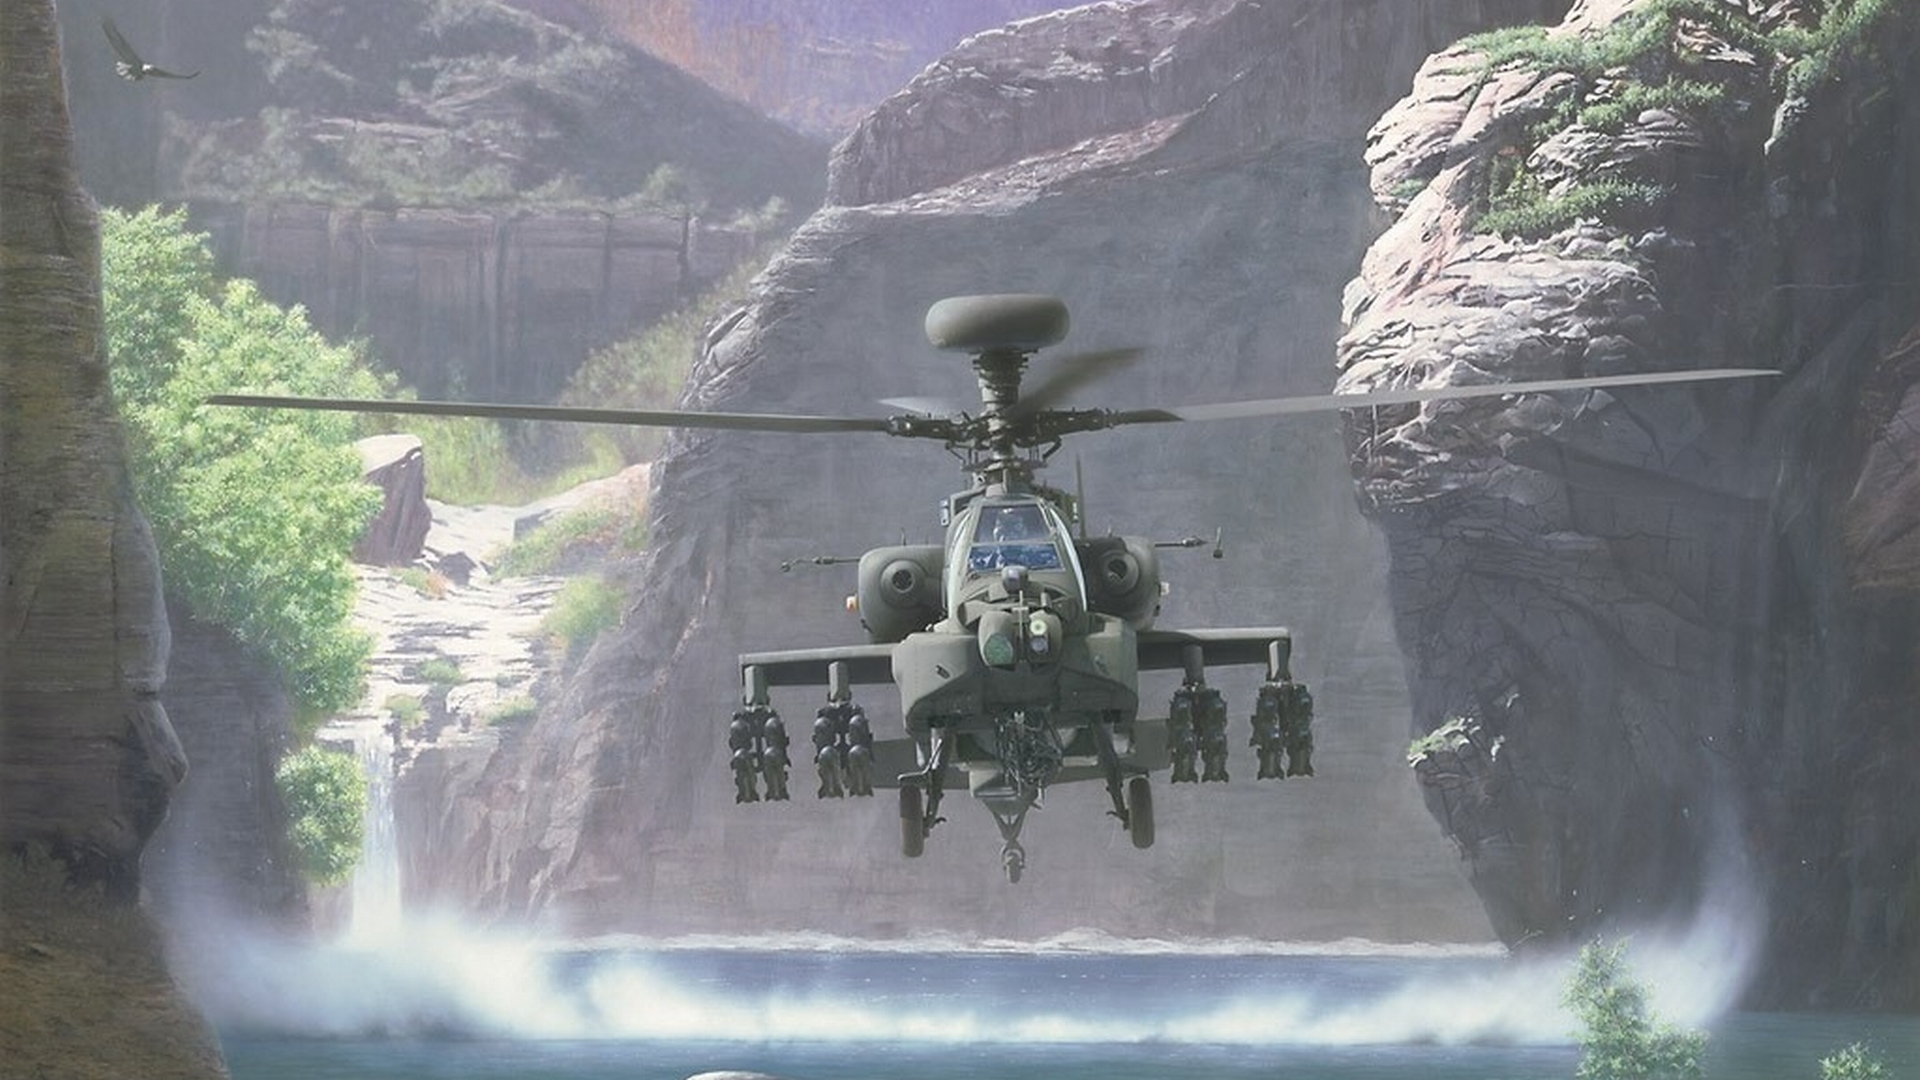 Military Helicopter Wallpaper